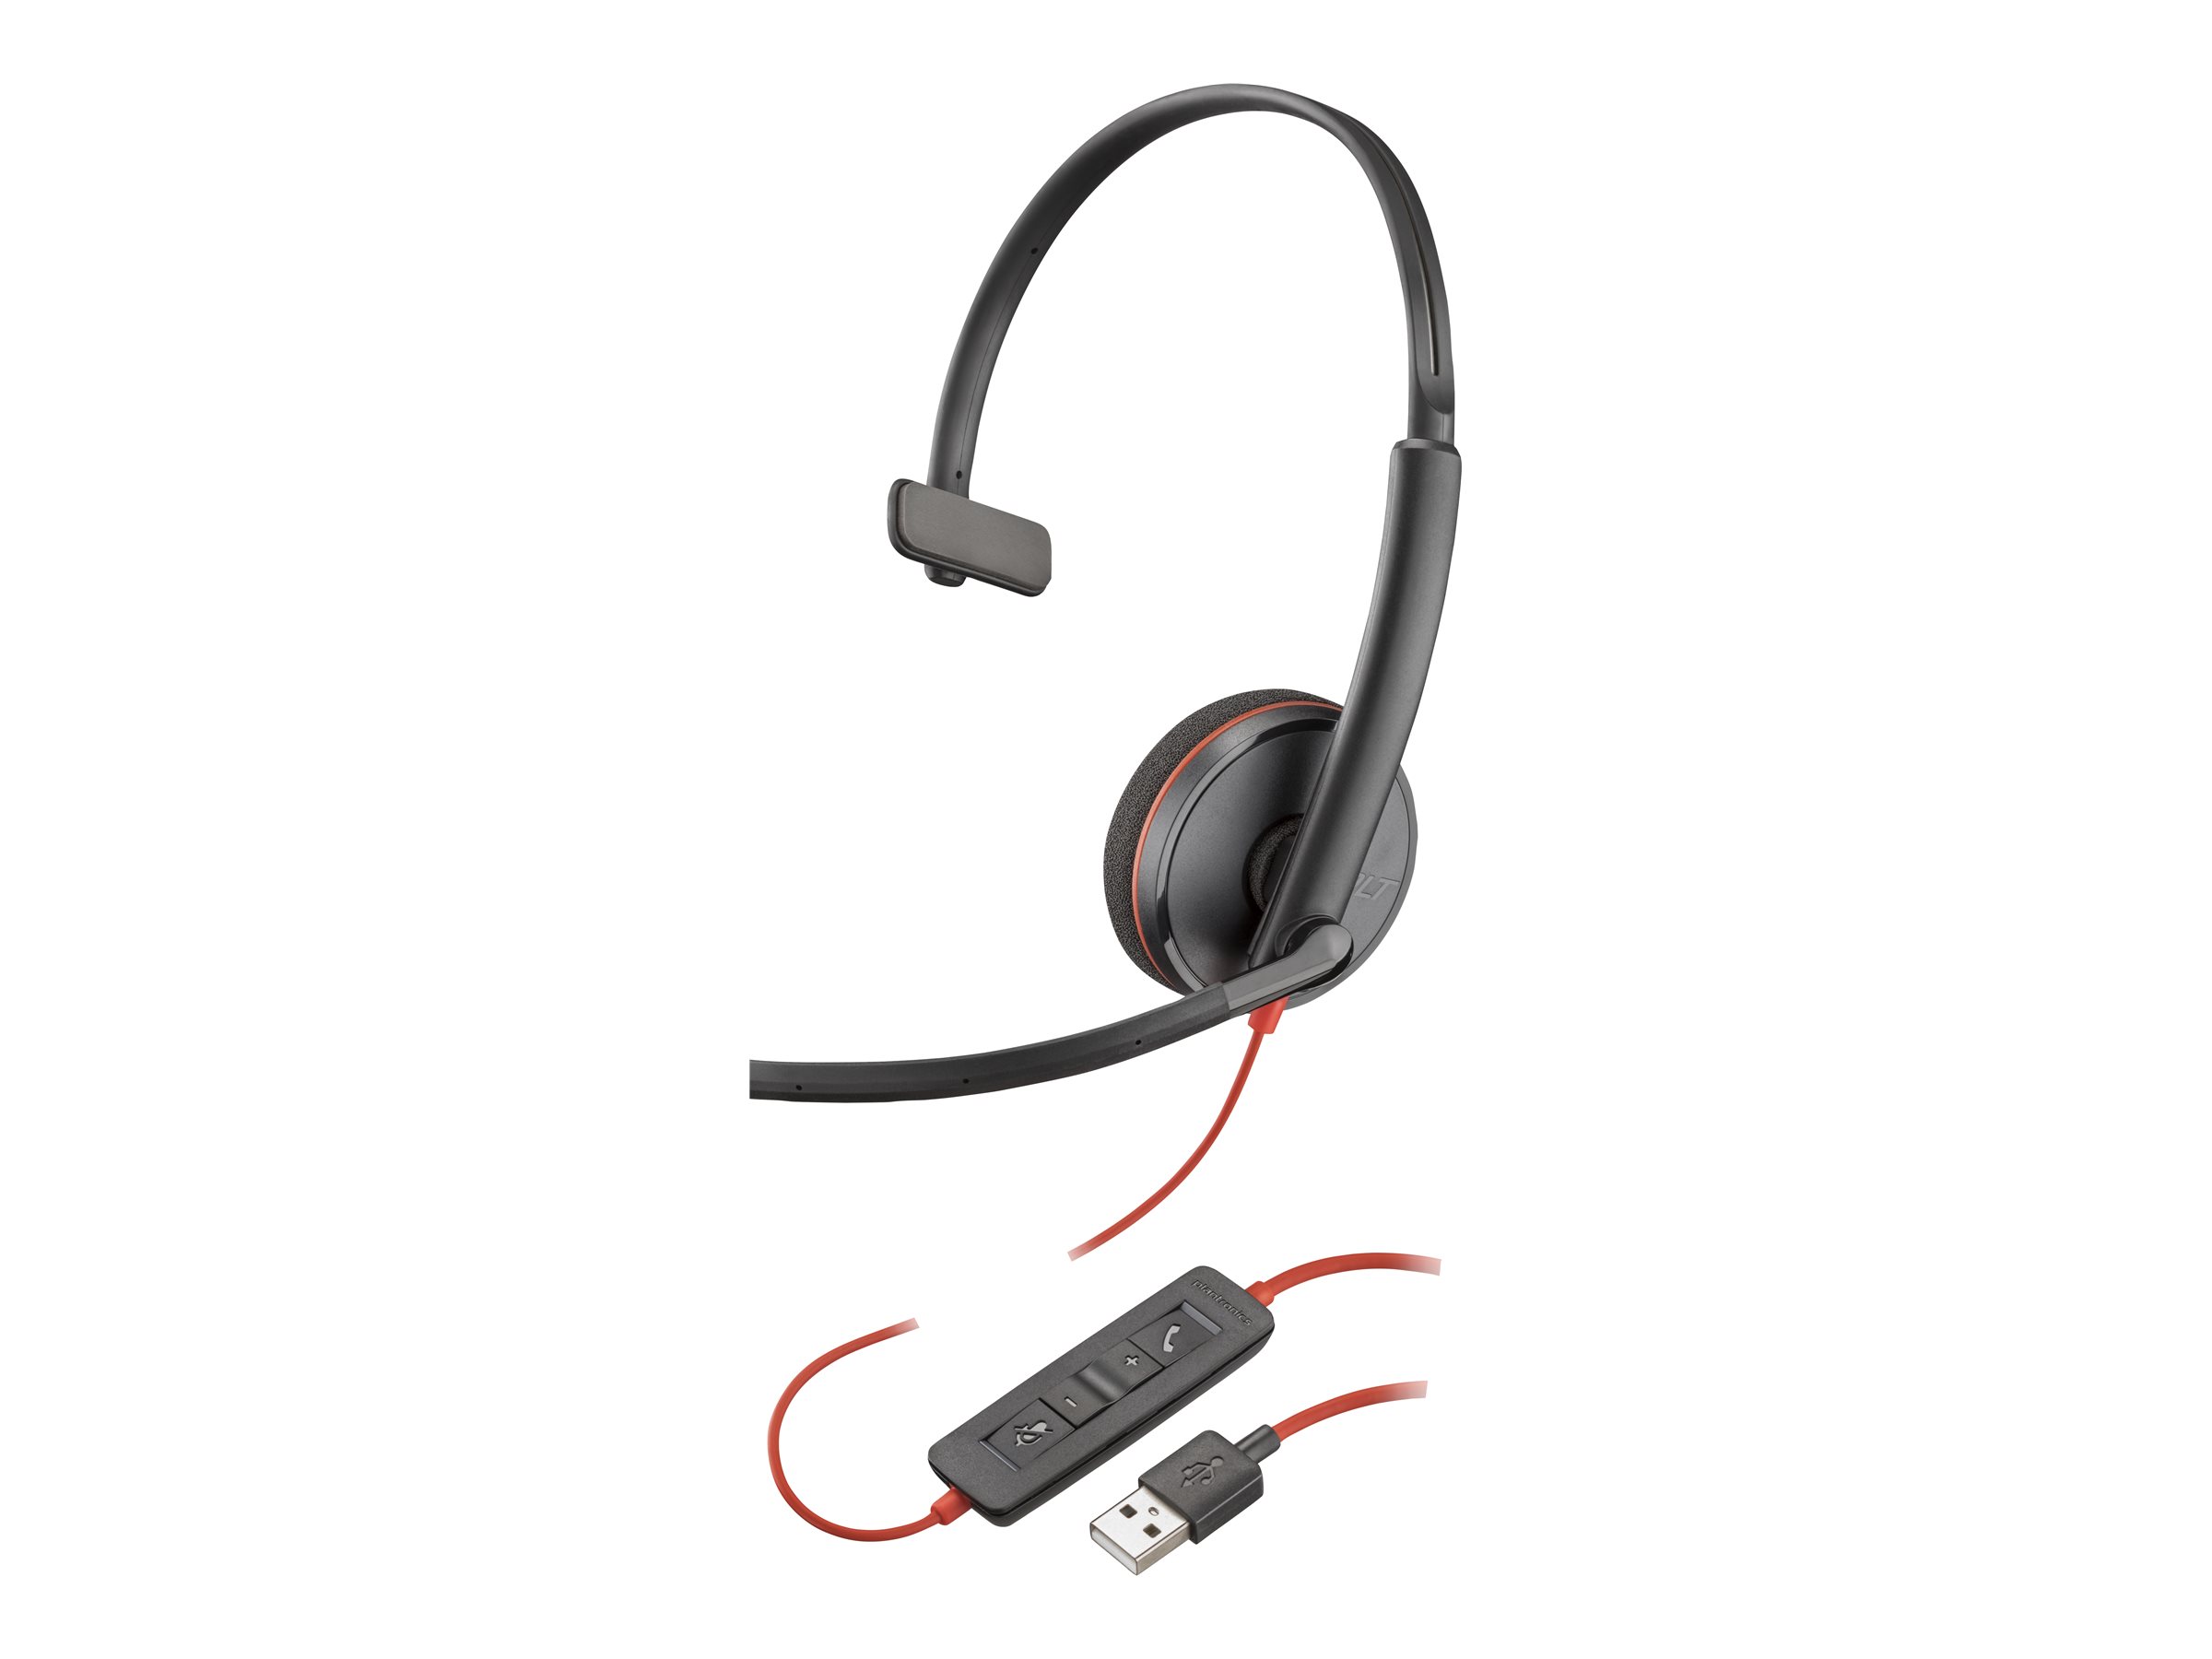 Poly Headset Blackwire C3210 monaural USB-A